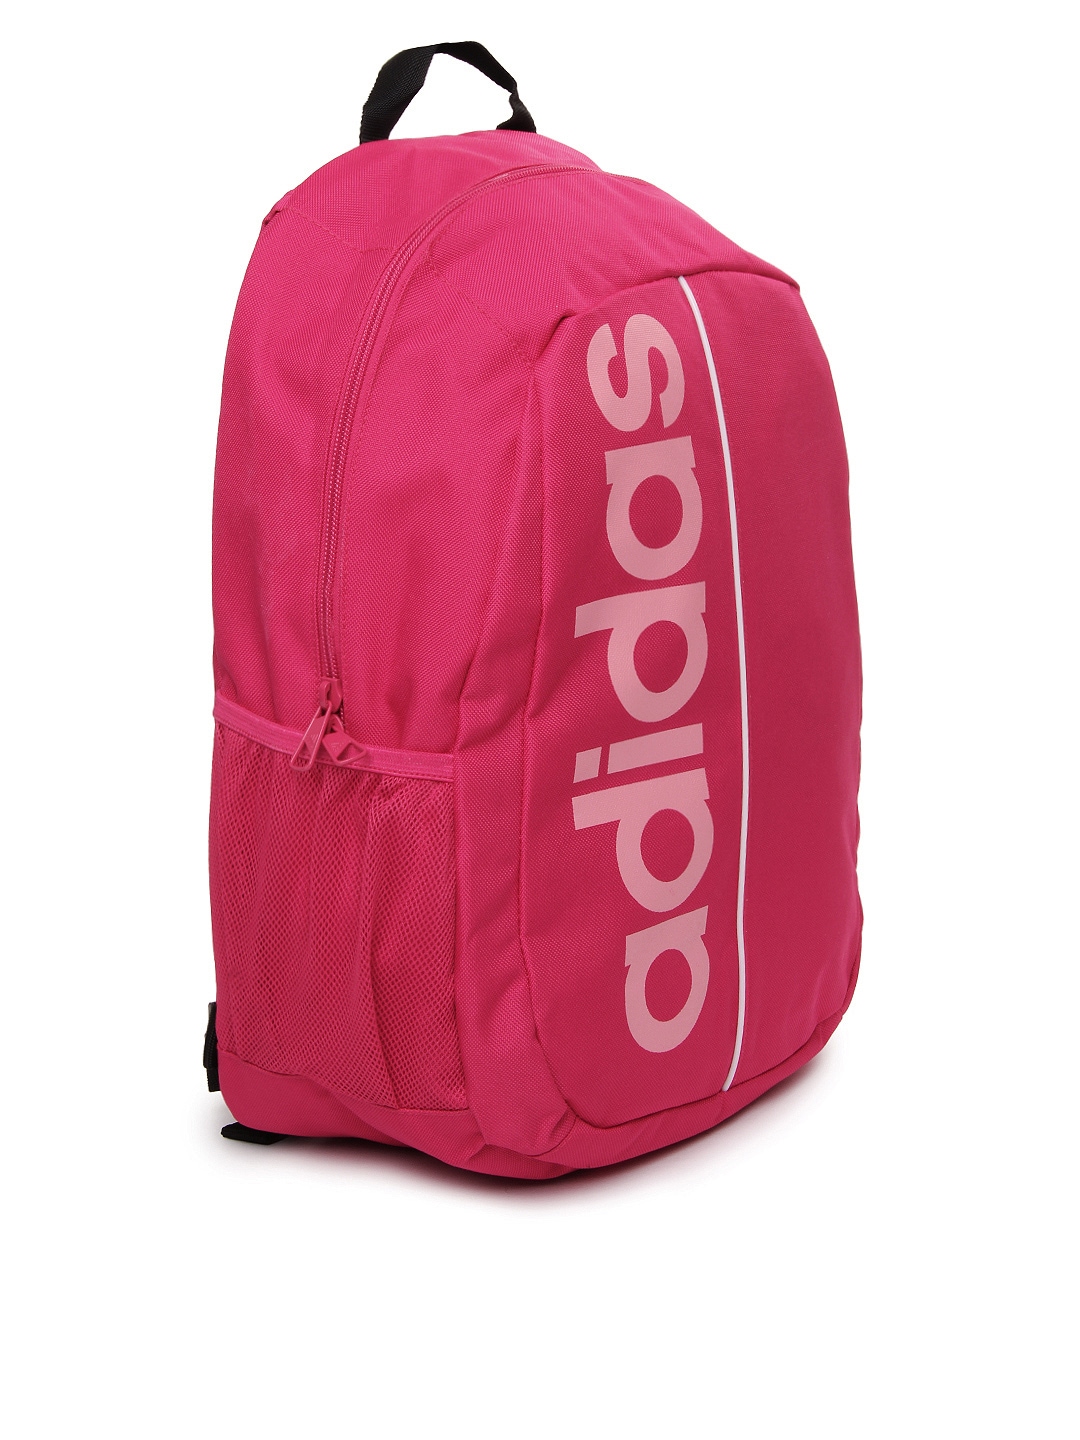 adidas backpacks for girls adidas online shop india